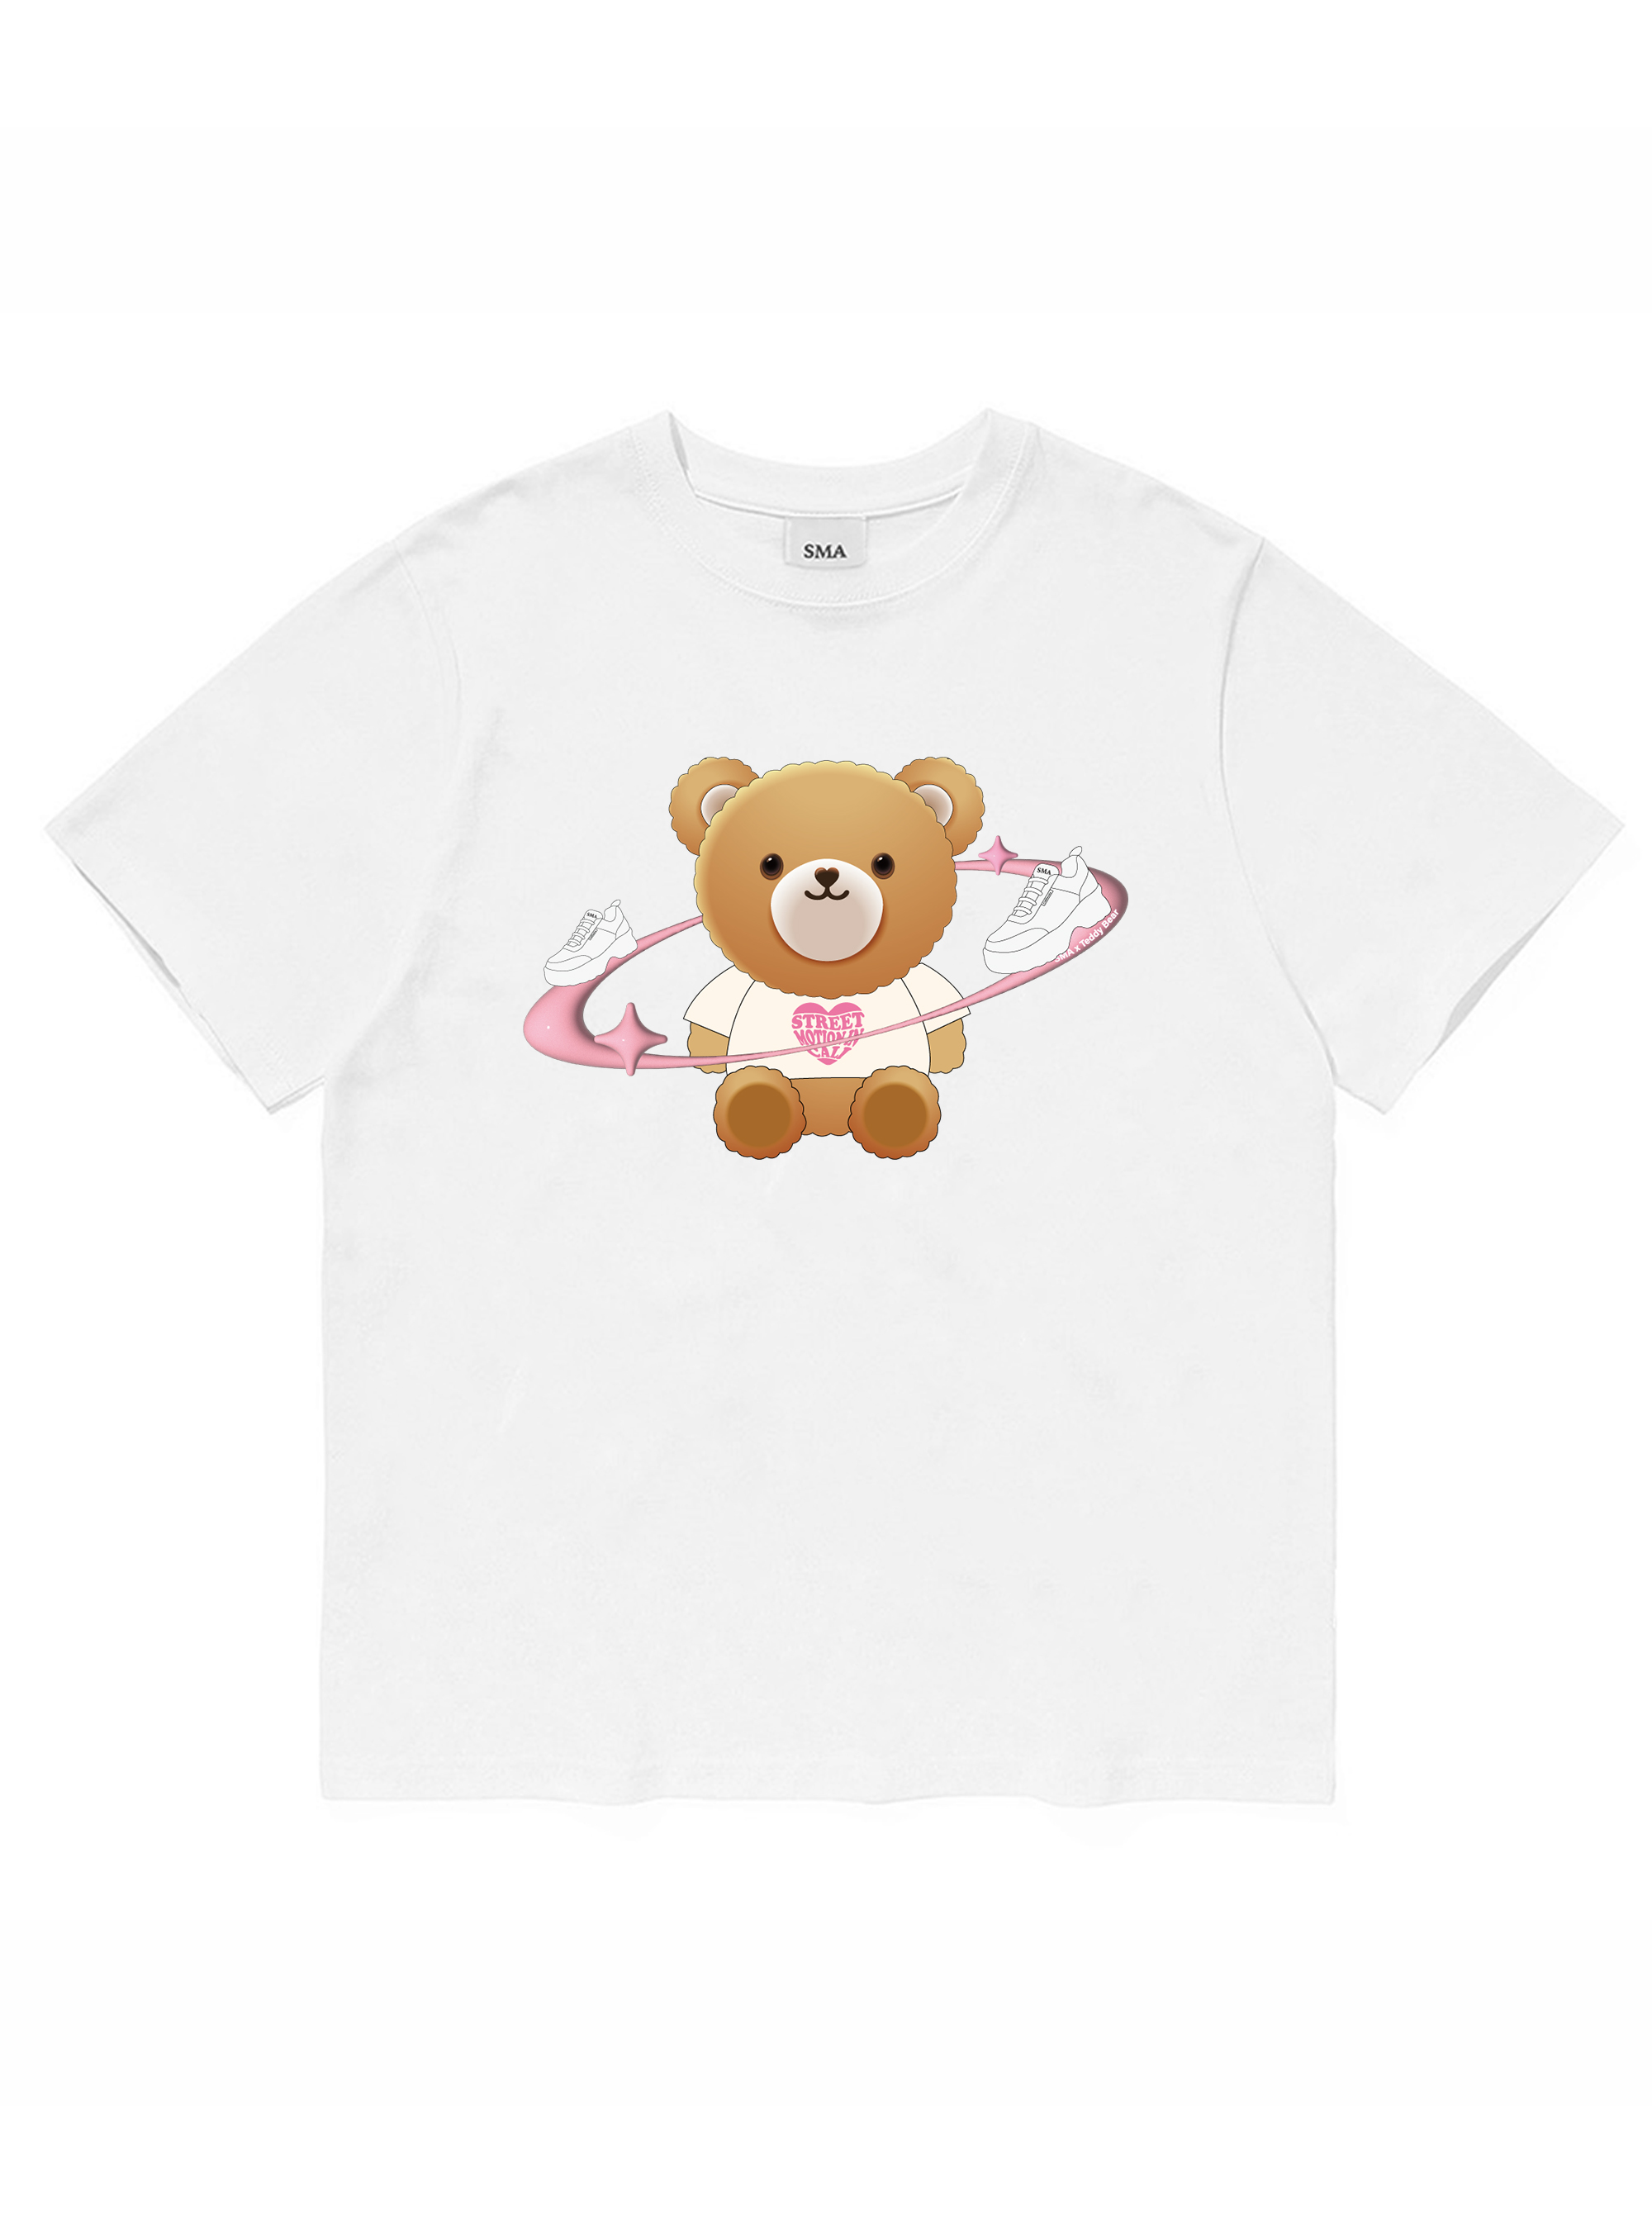 Space Teddy Logo T-Shirt_White (Semi Over-Fit) [16% SALE]